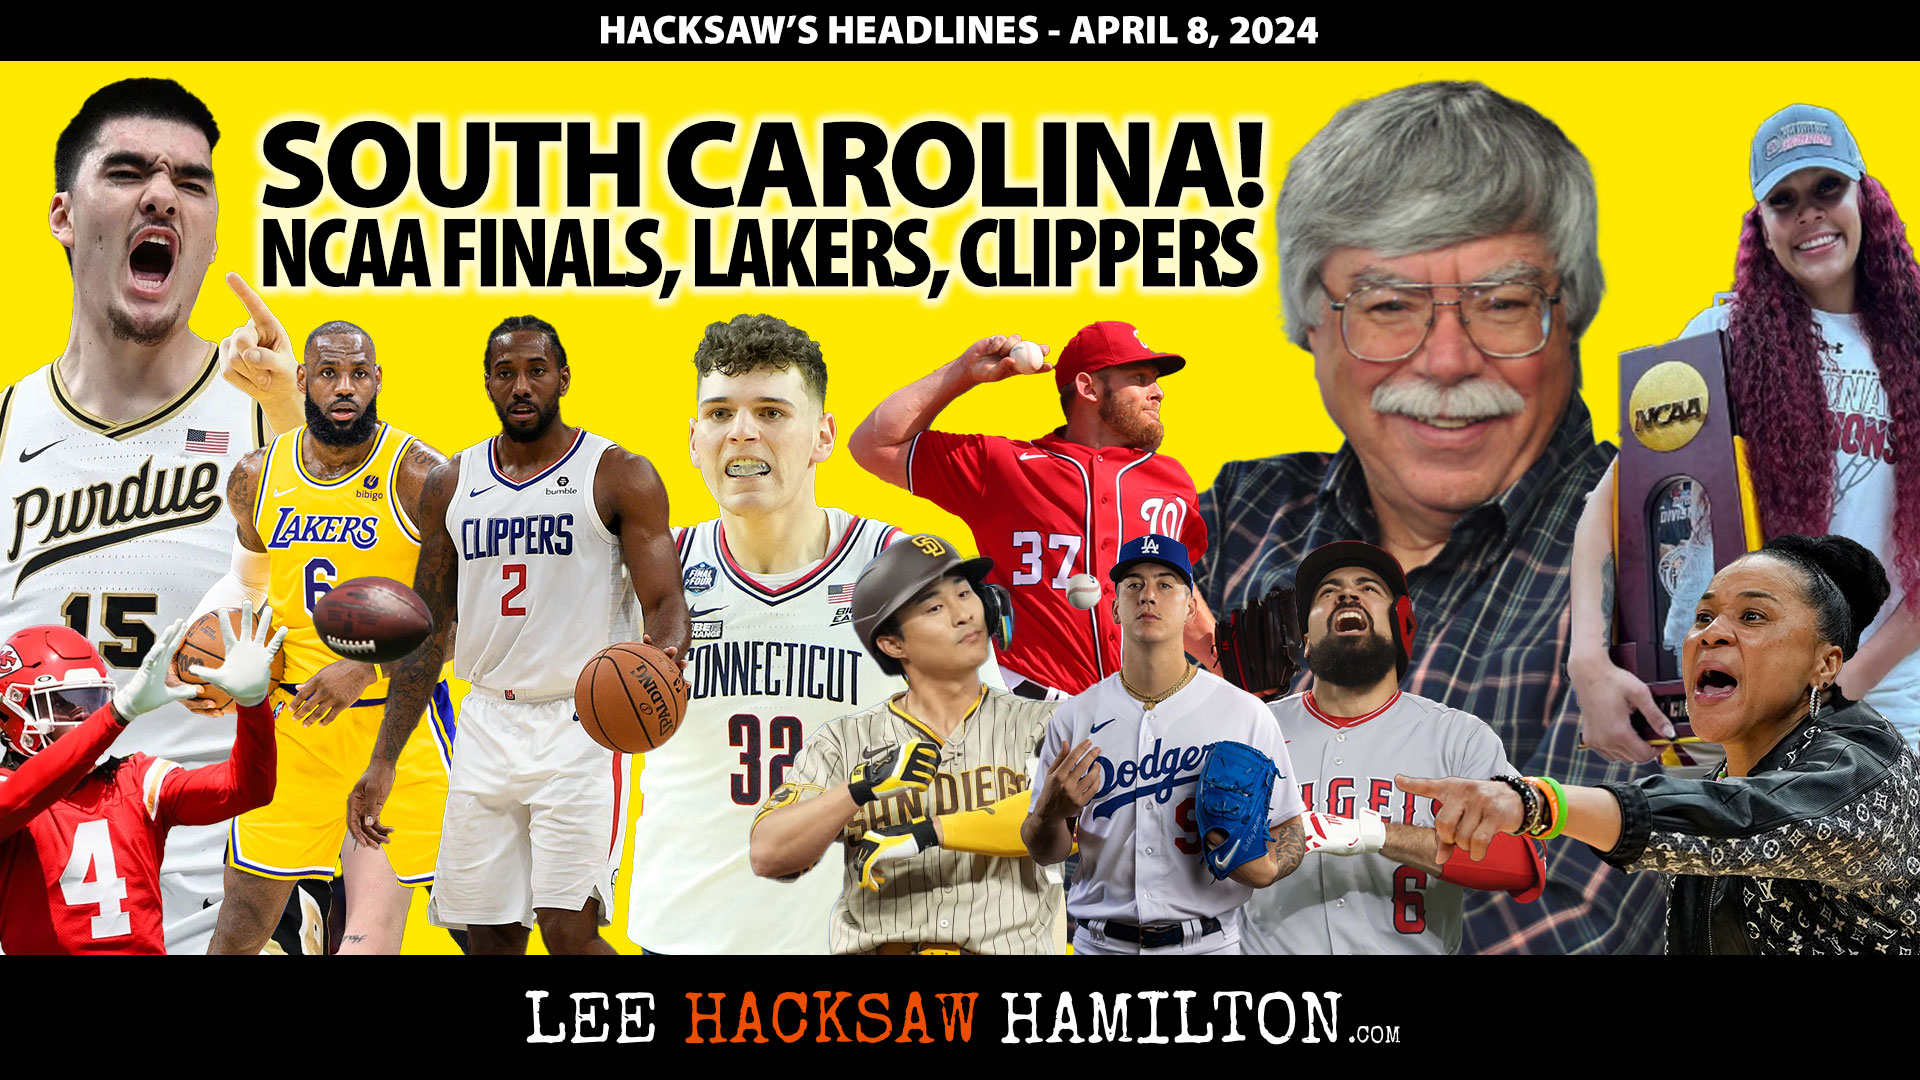 Lee Hacksaw Hamilton discuses South Carolina Champs, Mens Final, Lakers, Clippers, Padres, Dodgers, Angels